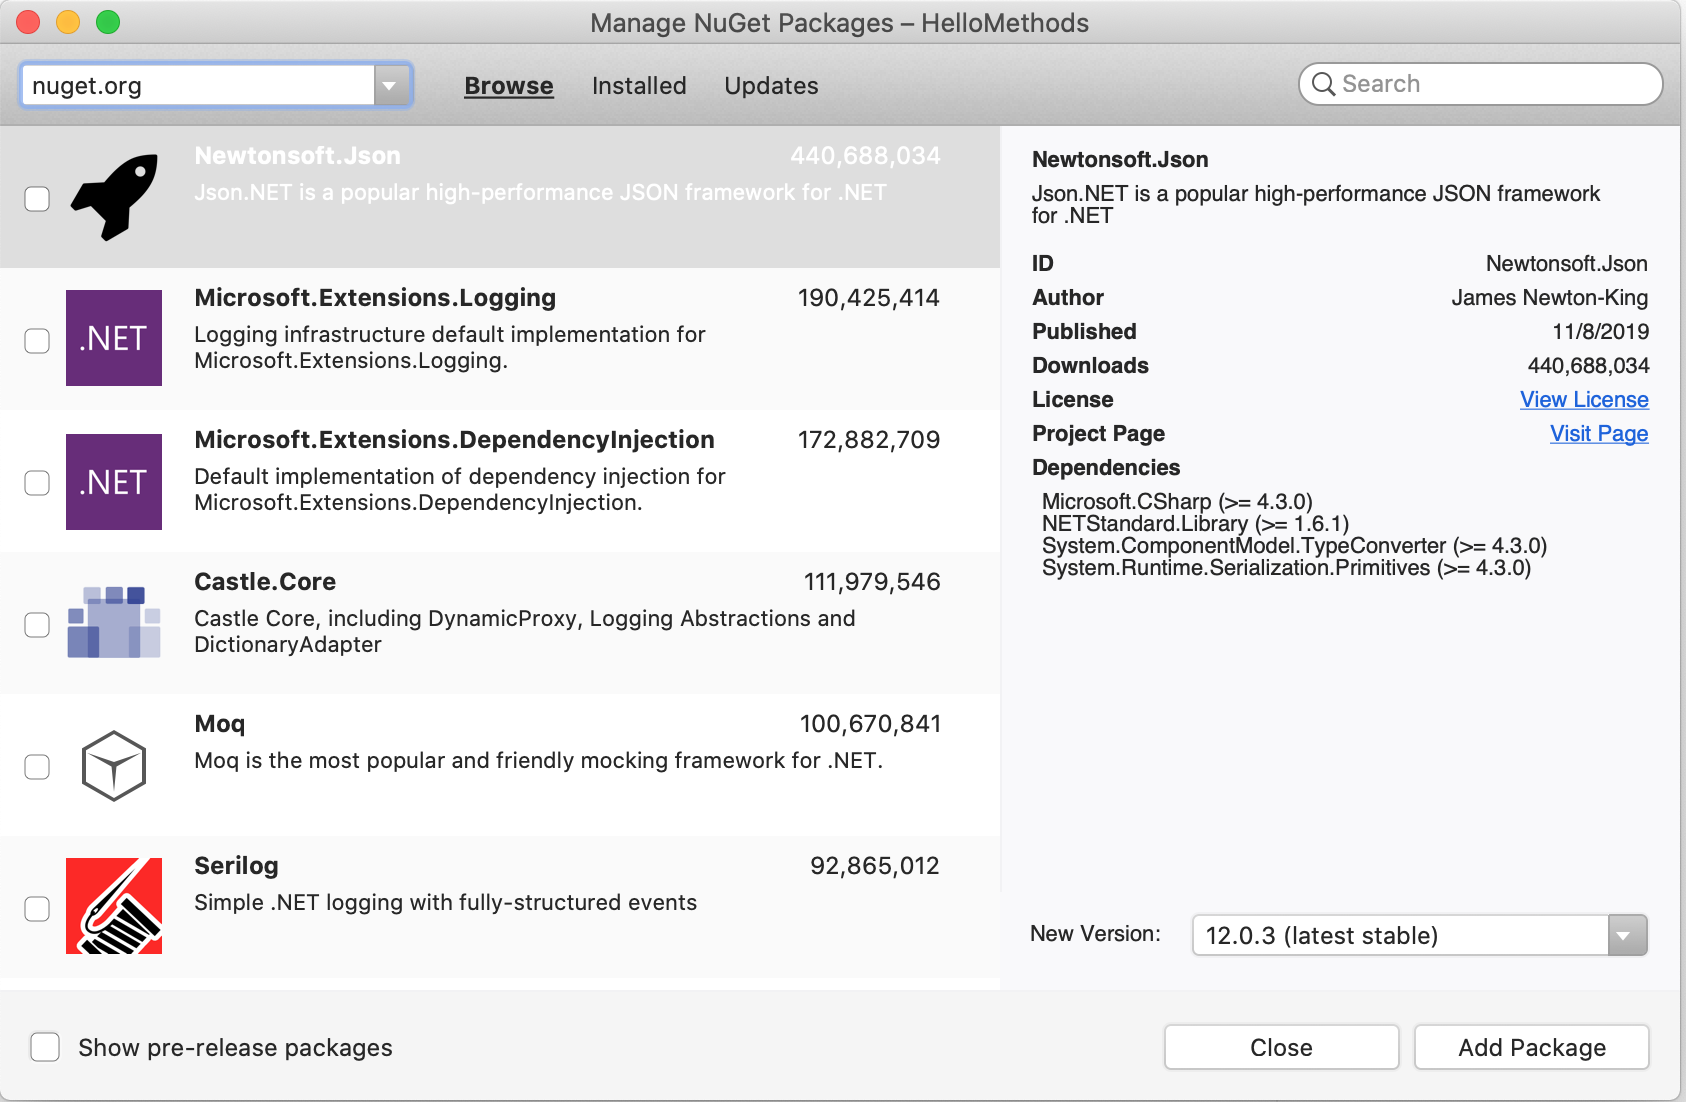 Package browsing view of the NuGet package manager window